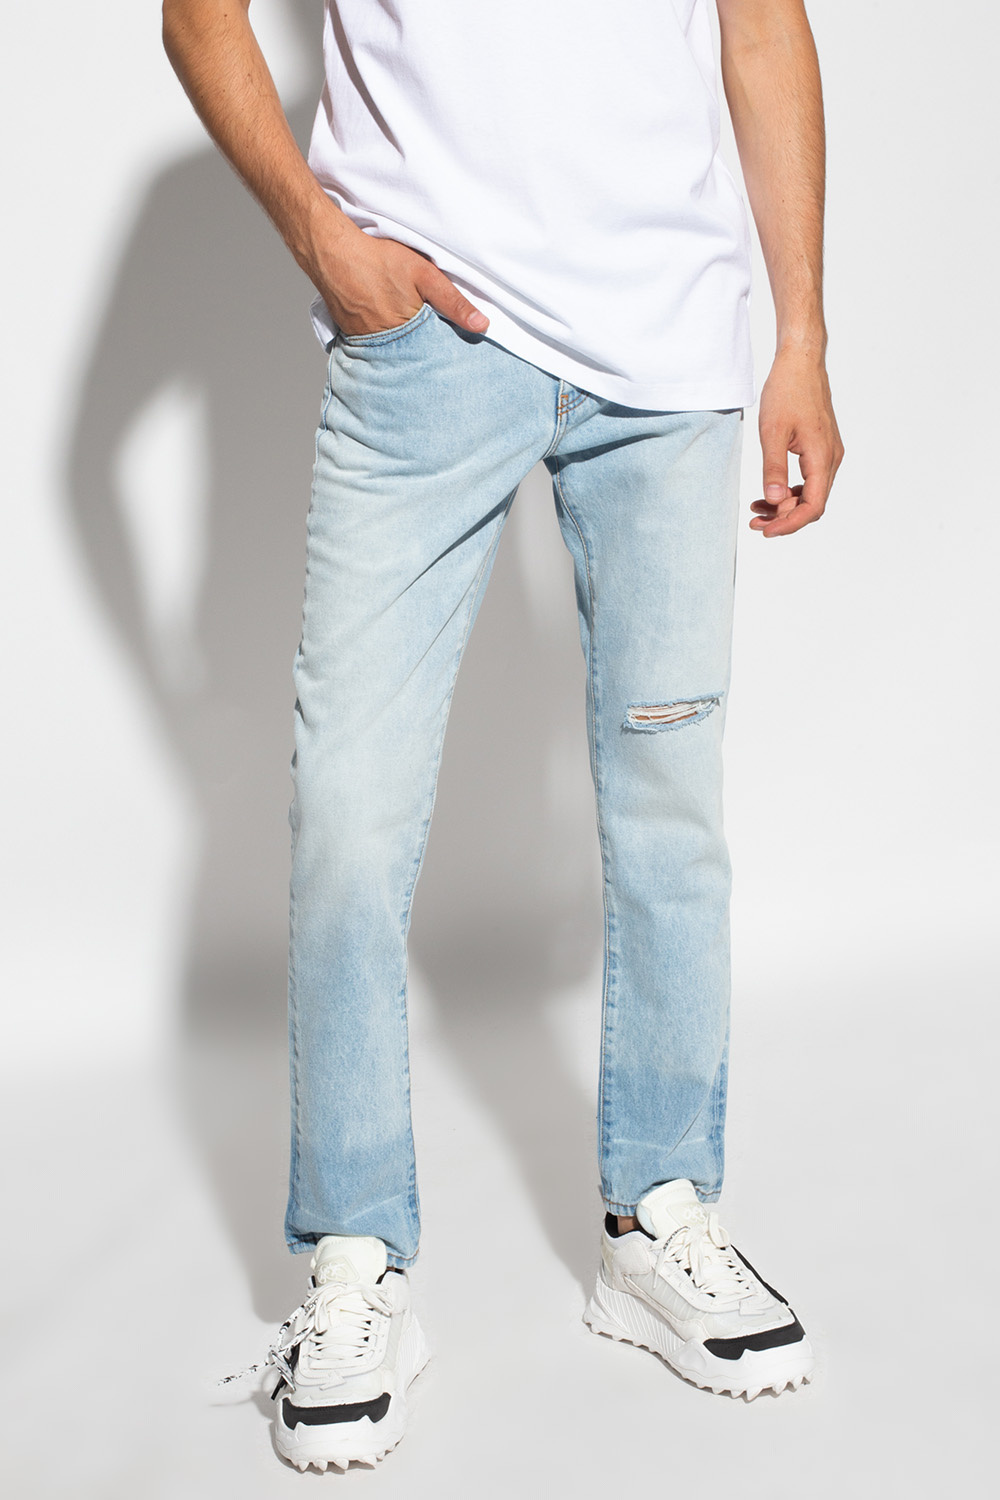 Off-White Distressed jeans